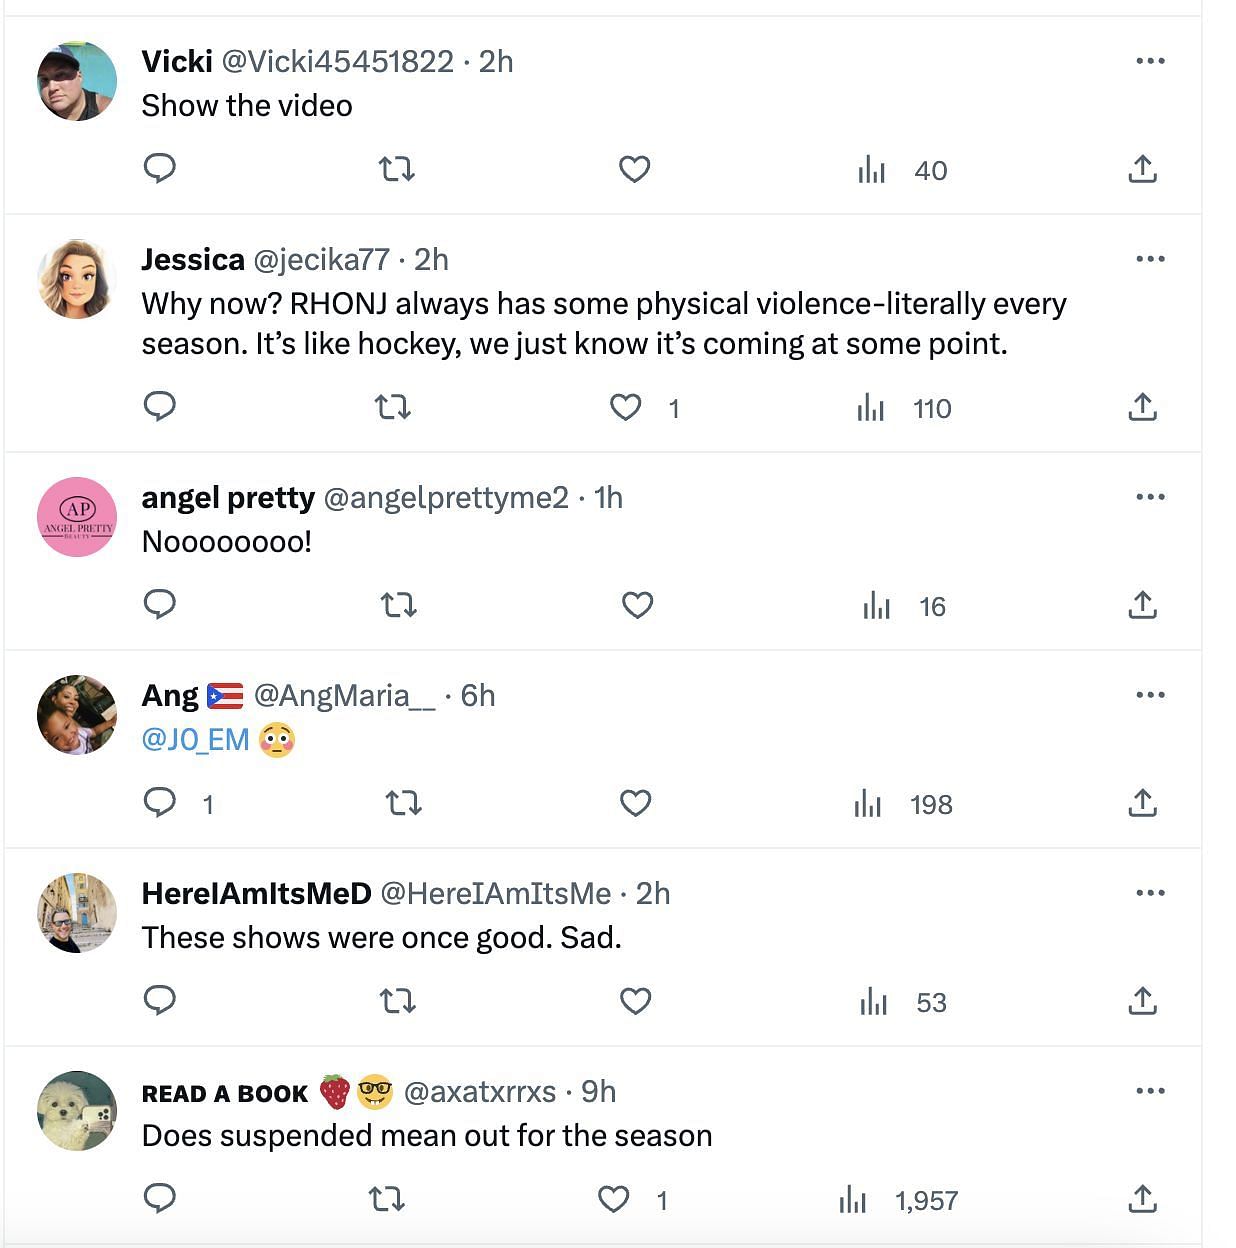 Social media users pick sides as The Real Housewives of New Jersey stars get into a physical altercation: More details revealed as Aydin and Cabral get suspended. (Image via X)